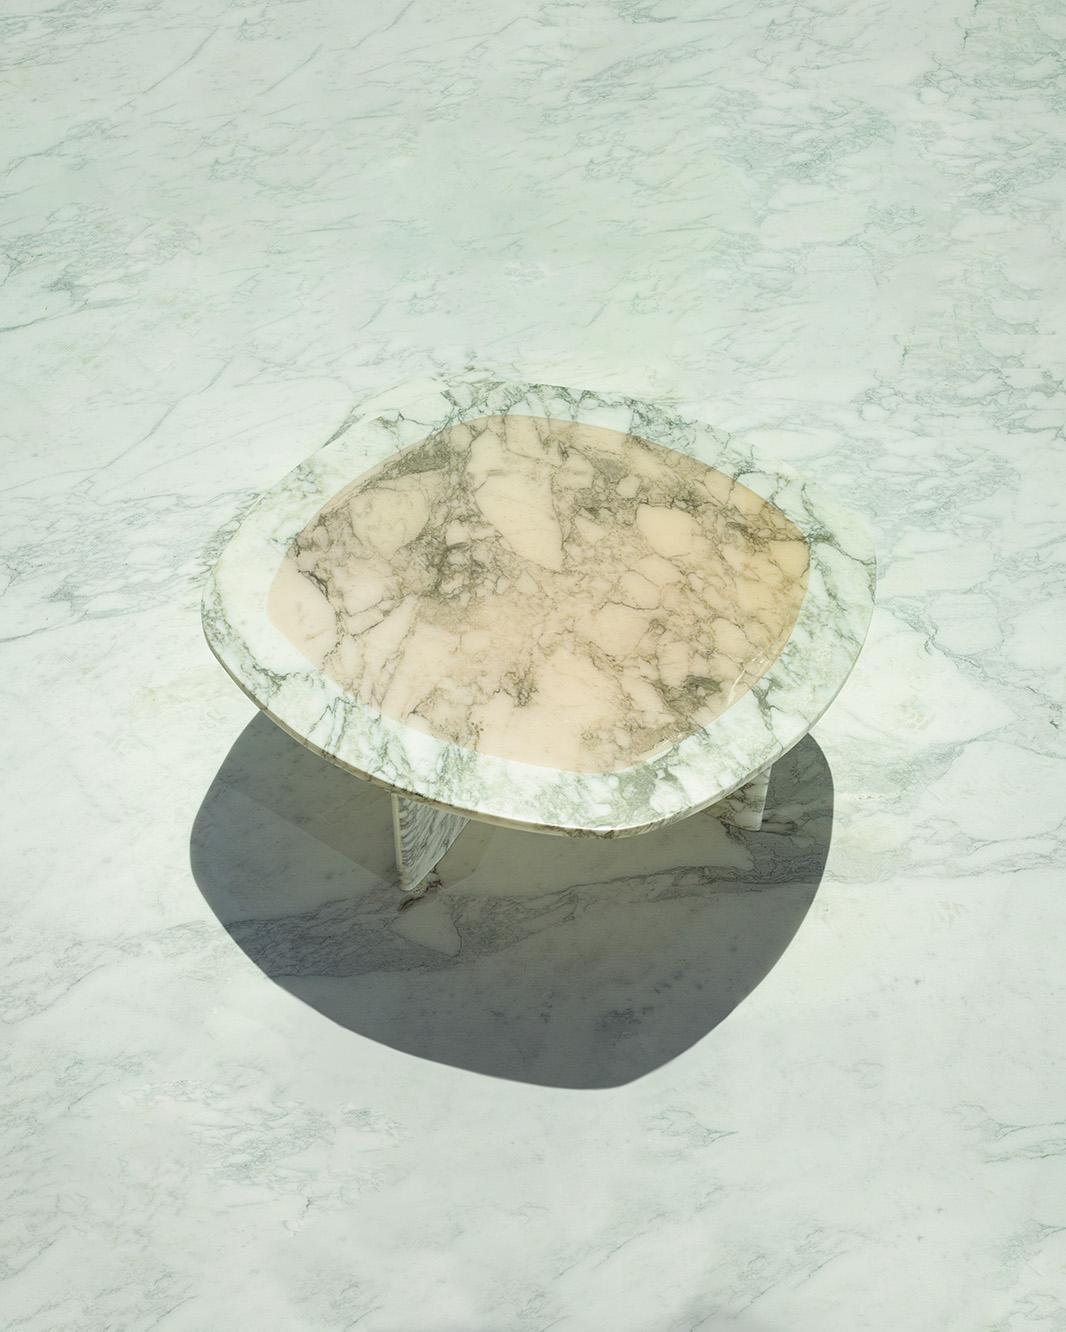 Minerals Arabescato, Rounded Square Low Table by Carla Baz
Dimensions: L 100 x W 100 x H 35/45 CM
Weight: 65 kg
Material: Brescia Viola Marble, Resin.
Also available in other shapes: Round, Rounded square.

The Minerals low table series are an